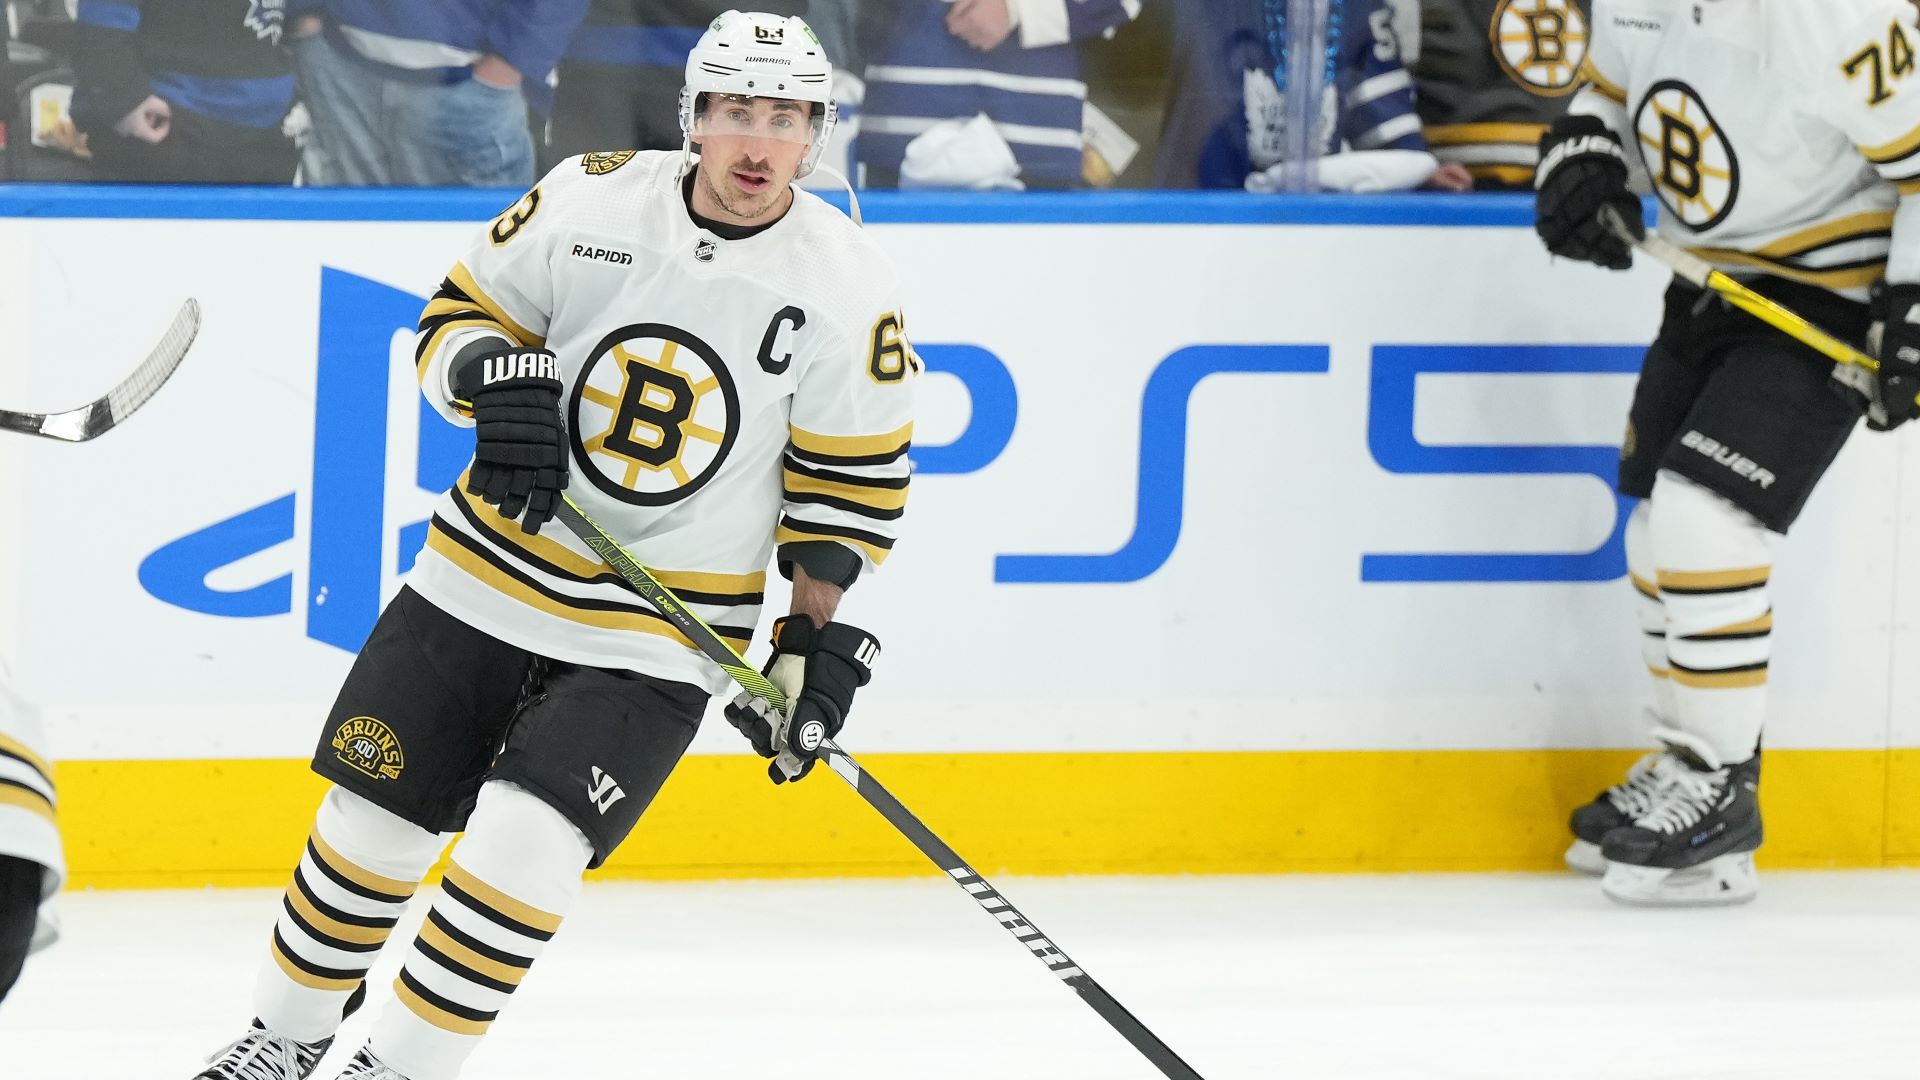 Bruins’ Don Sweeney Shares Brad Marchand Update After Game 4